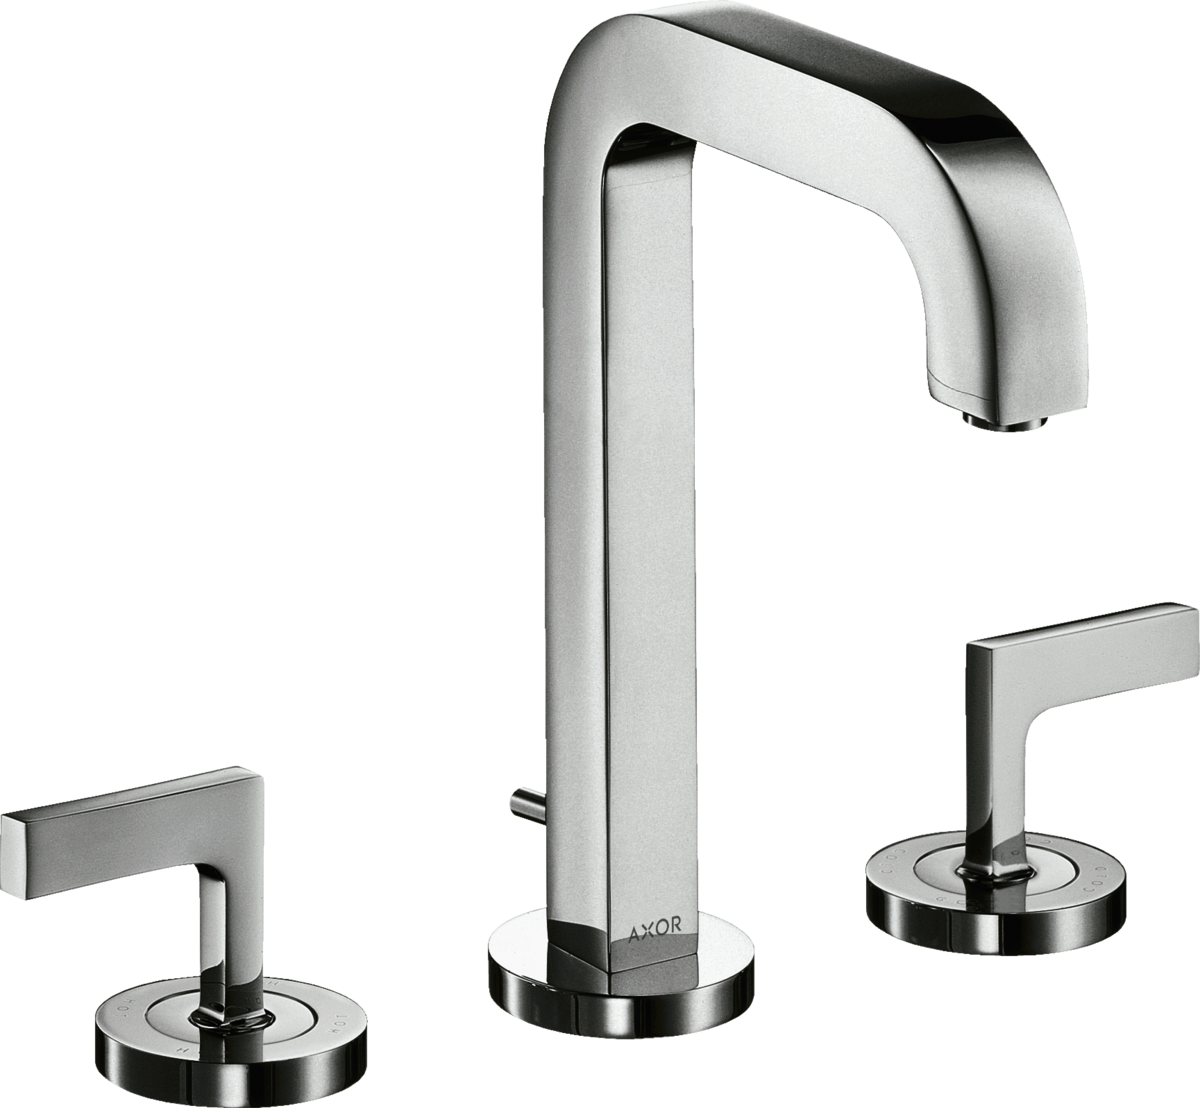 Picture of HANSGROHE AXOR Citterio 3-hole basin mixer 170 with spout 140 mm, lever handles, escutcheons and pop-up waste set #39135000 - Chrome